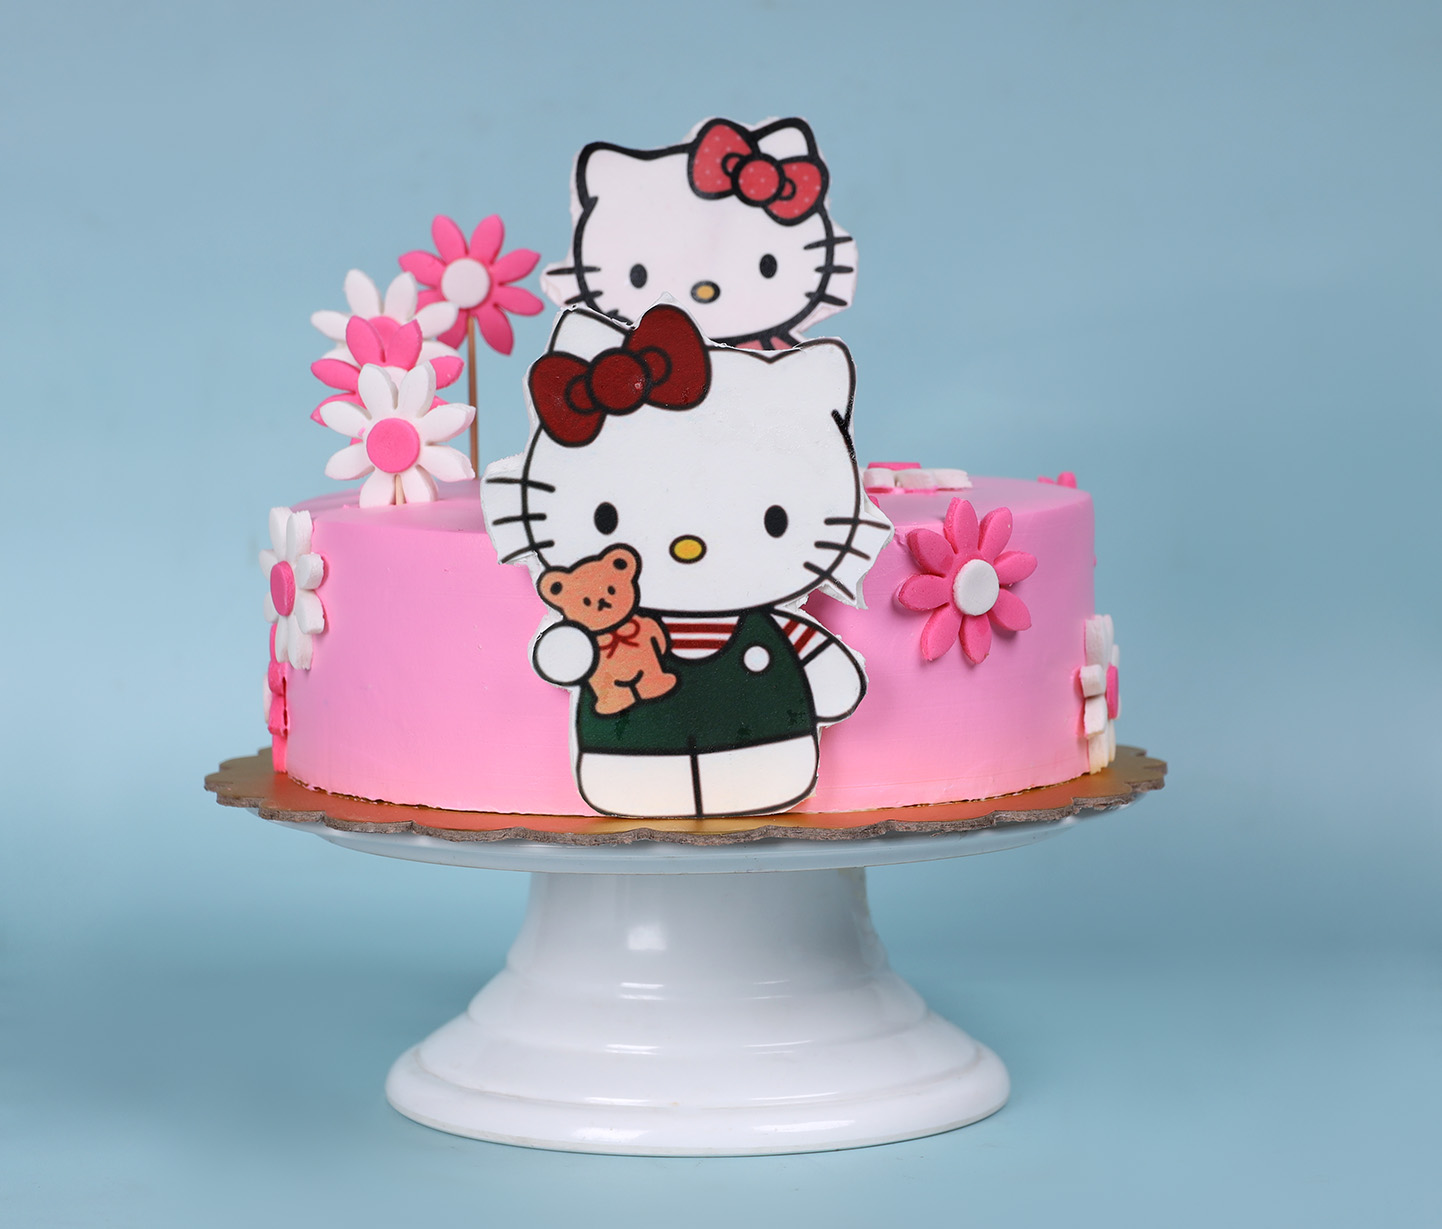 3D Sculpted Hello Kitty Cake - The Making of | Ella Yovero | Lacupella Cake  Boutique - YouTube